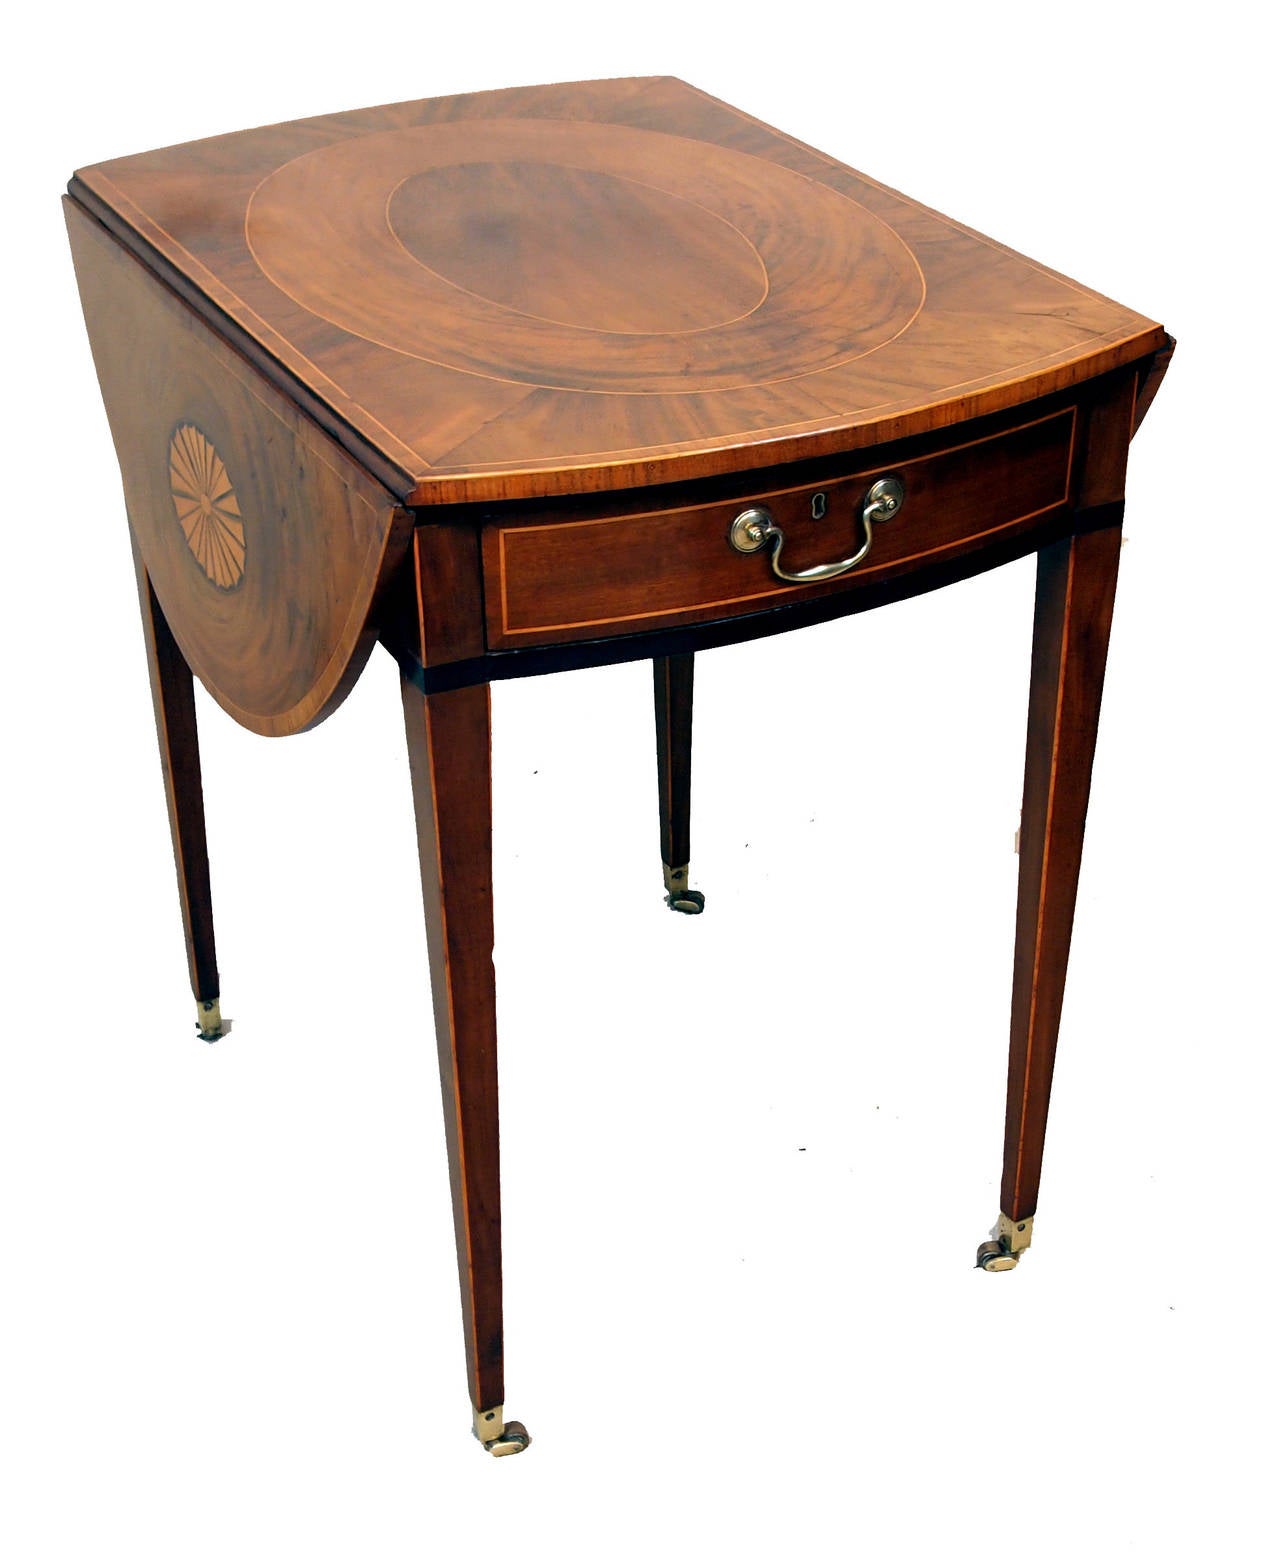 A Delightful And Very Good Quality George III Period Mahogany 
Oval Pembroke Table Having Superbly Figured Top With Inlaid 
Ovals, Shells And Banding, Above One Frieze Drawer Retaining 
Original Swan Neck Handle Raised On Fine Square Tapered Legs